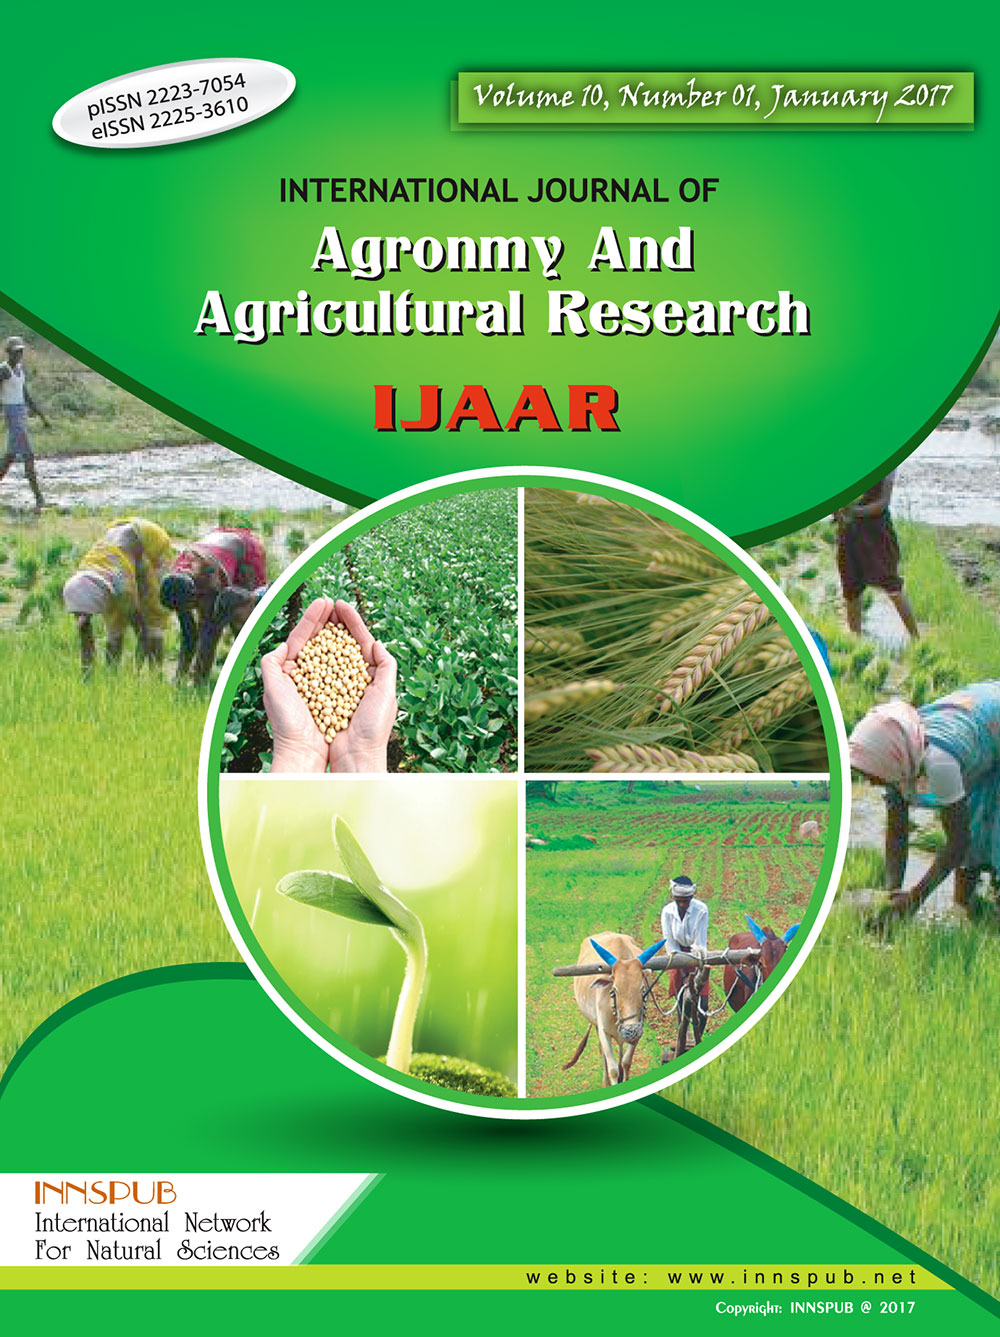 International Journal of Agronomy and Agricultural Research 